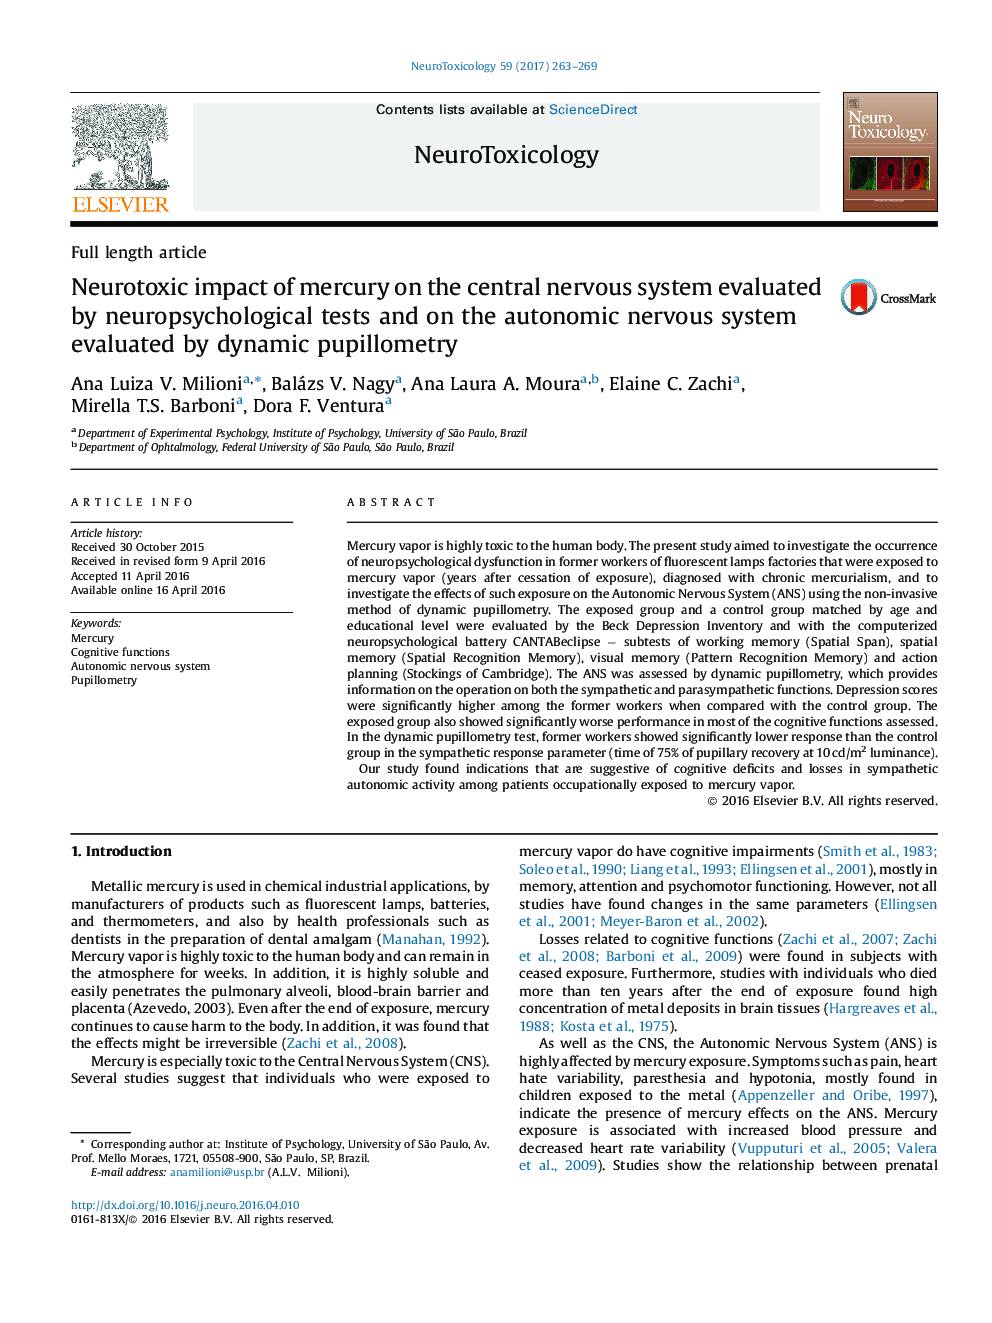 Neurotoxic impact of mercury on the central nervous system evaluated by neuropsychological tests and on the autonomic nervous system evaluated by dynamic pupillometry